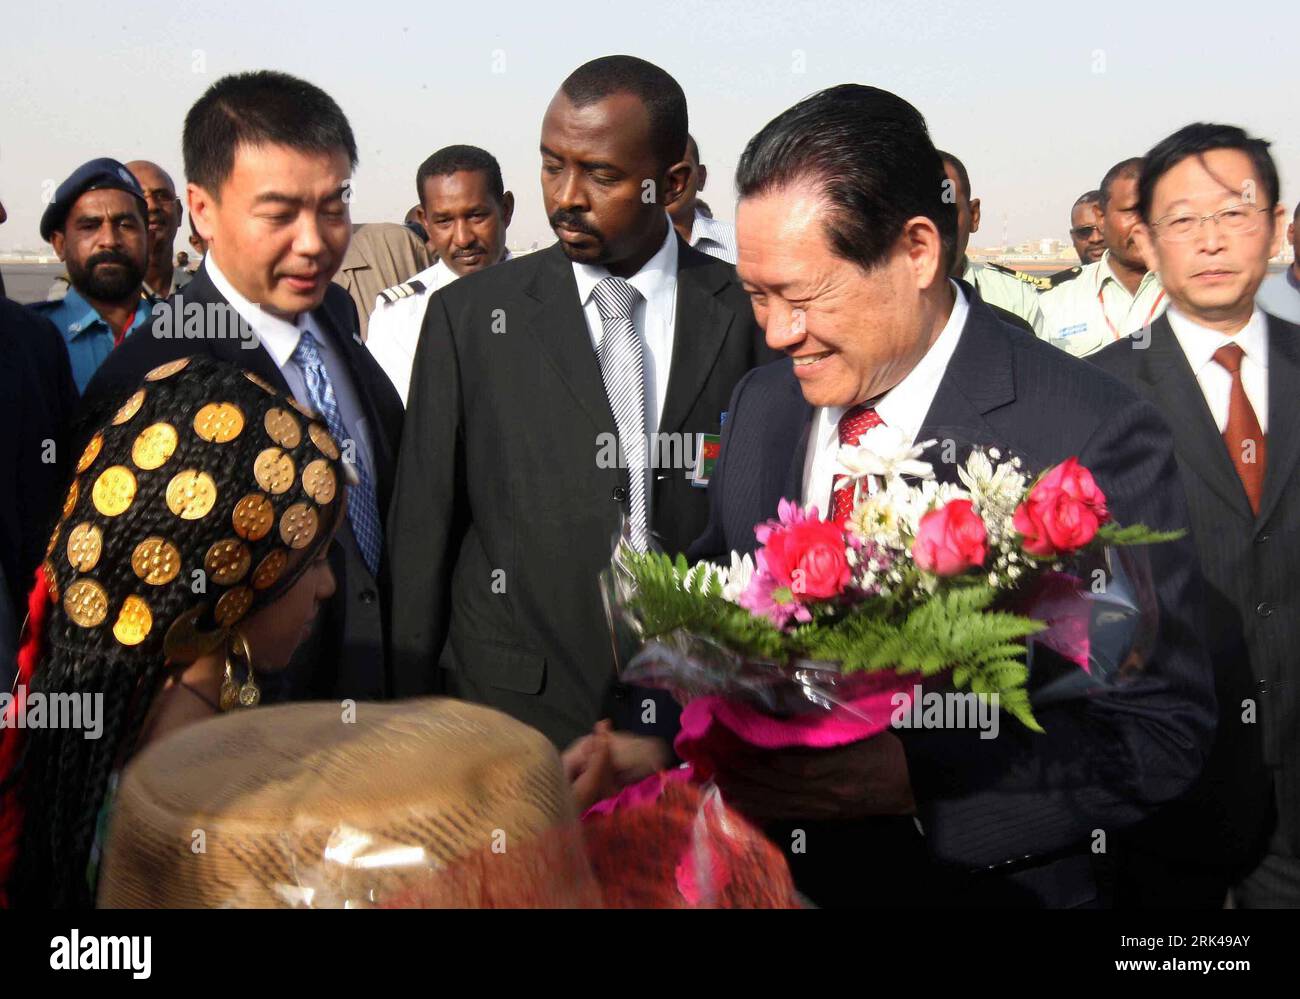 Bildnummer: 53602128  Datum: 16.11.2009  Copyright: imago/Xinhua Zhou Yongkang (R Front), a member of the Standing Committee of the Political Bureau of the Central Committee of the Communist Party of China, arrives at the international airport in Khartoum for a three-day official goodwill visit to Sudan on Nov. 16, 2009. (Xinhua/Liu Weibing) SUDAN-CHINA-ZHOU YONGKANG-ARRIVAL PUBLICATIONxNOTxINxCHN People Politik kbdig xkg 2009 quer    Bildnummer 53602128 Date 16 11 2009 Copyright Imago XINHUA Zhou Yong Kang r Front a member of The thing Committee of The Political Bureau of The Central Committe Stock Photo